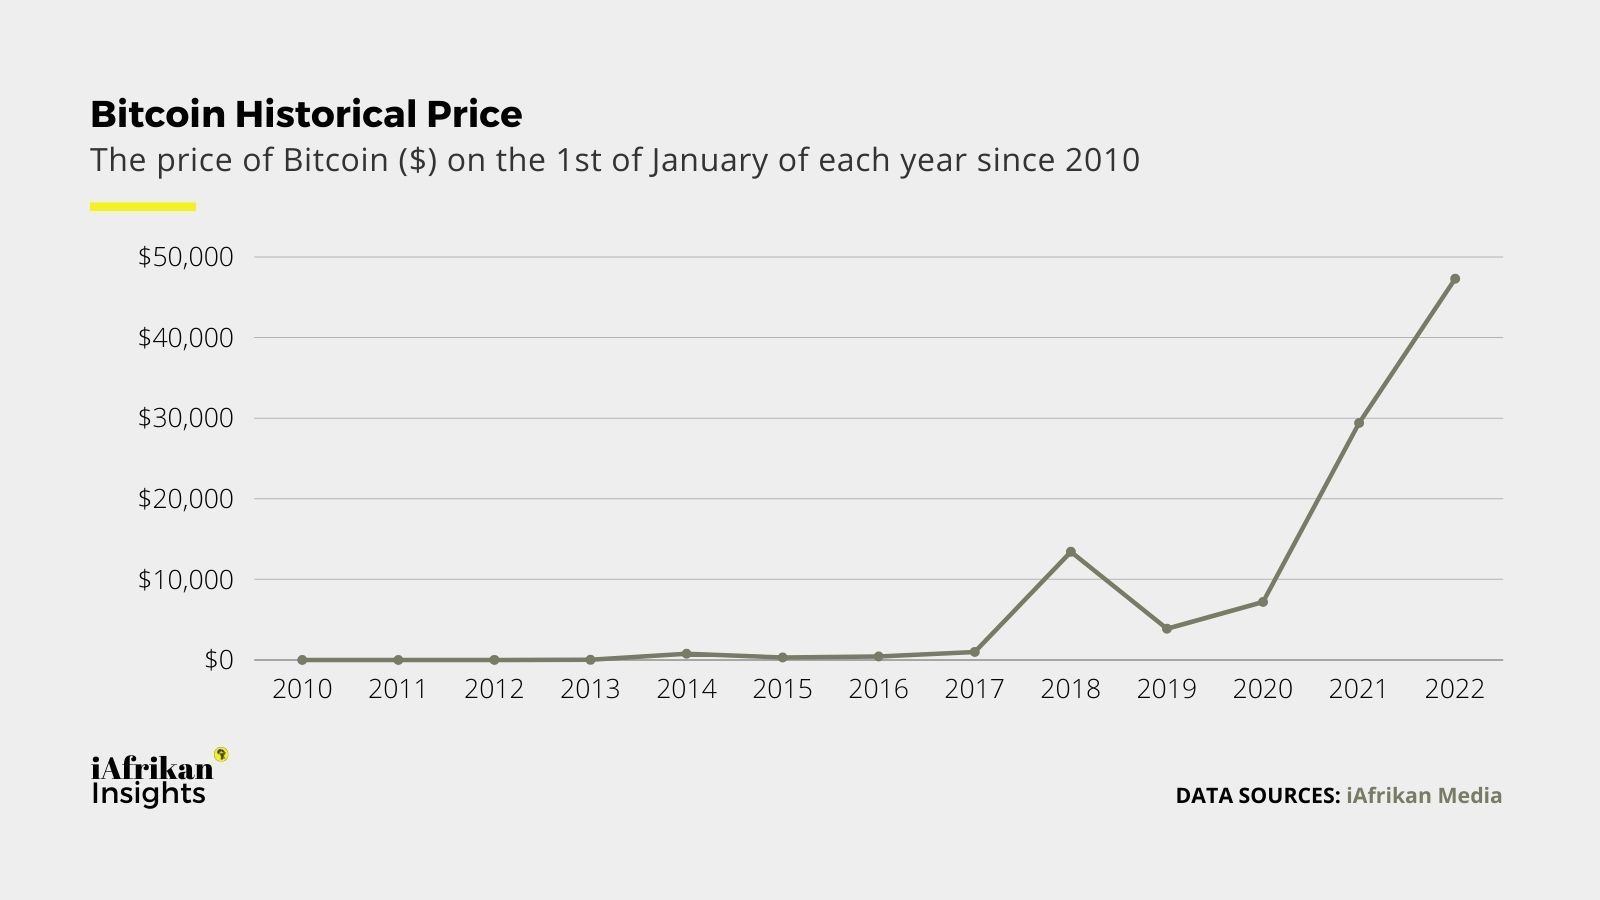 The price of Bitcoin ($) on the 1st of January of each year since 2010.